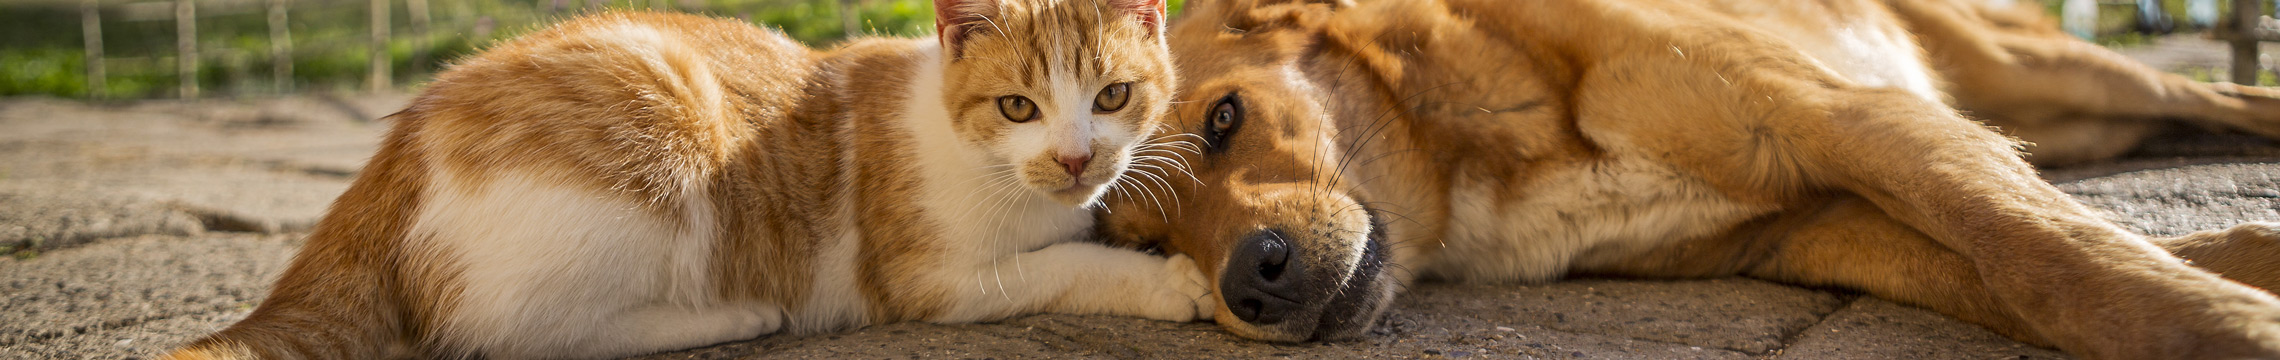 A cat and dog lounge together in an outdoor environment